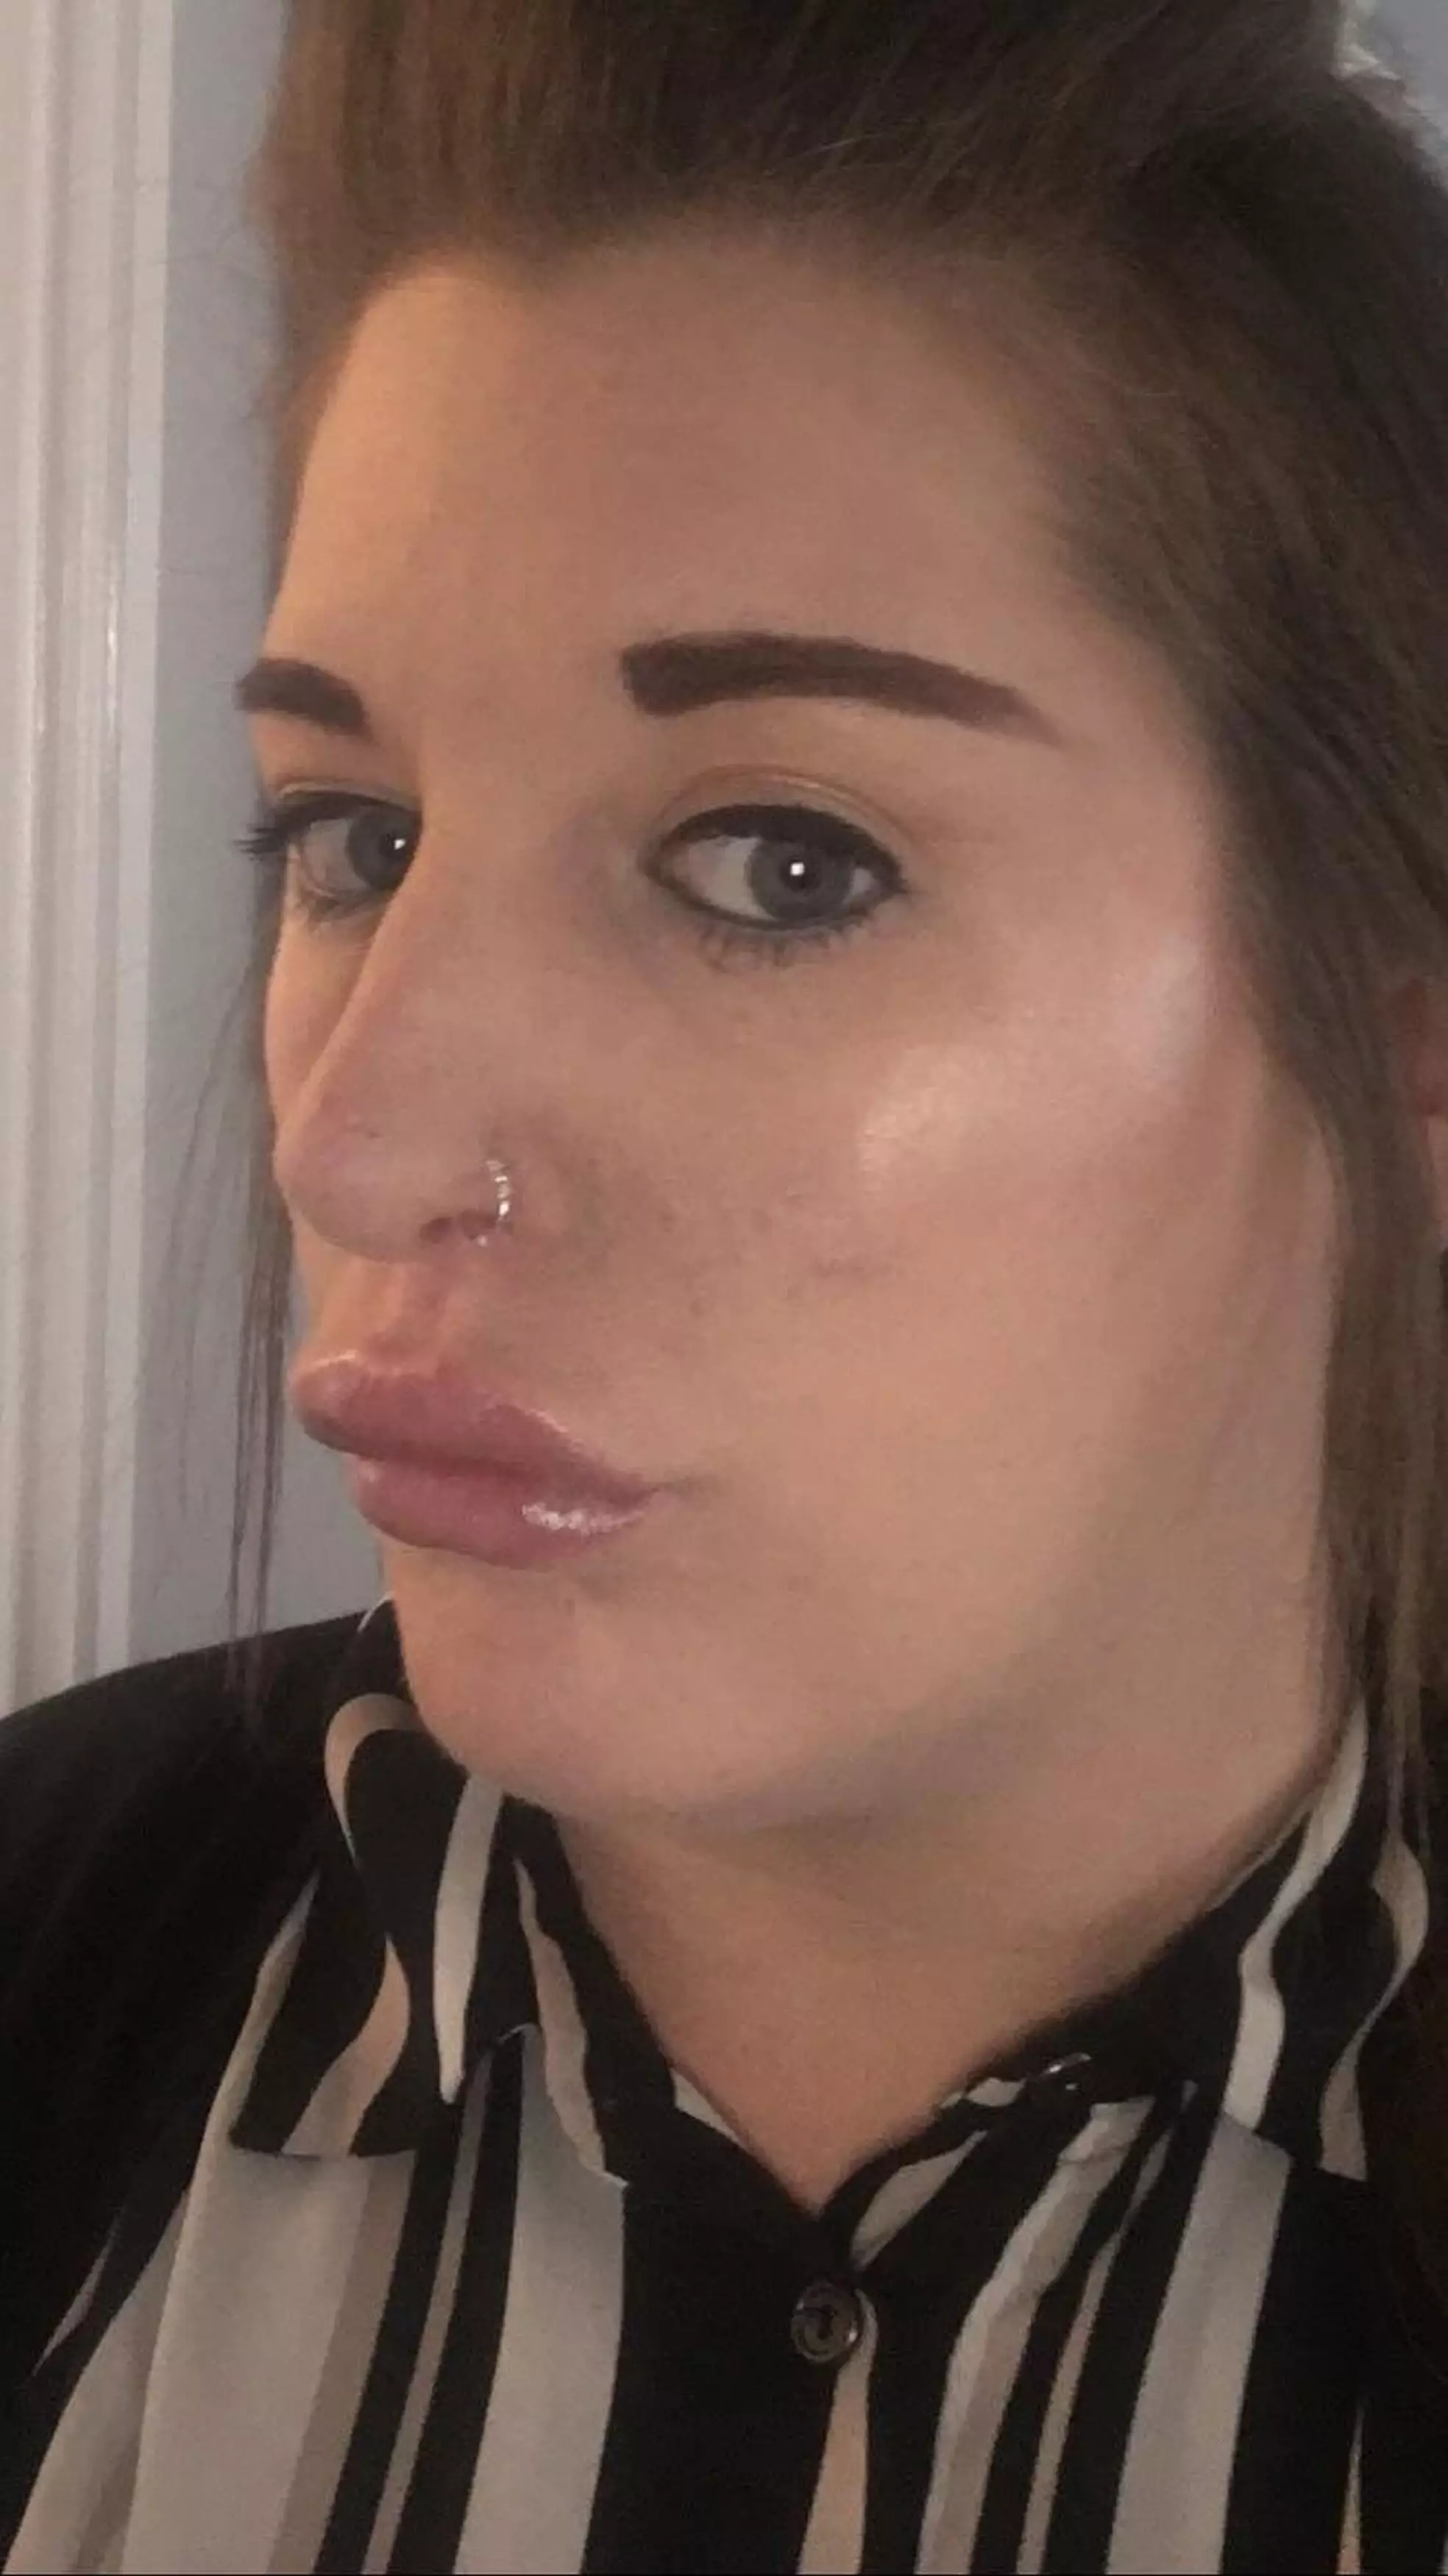 Kelly says she's scared to go out in public after the op left her with 'duck lips'.